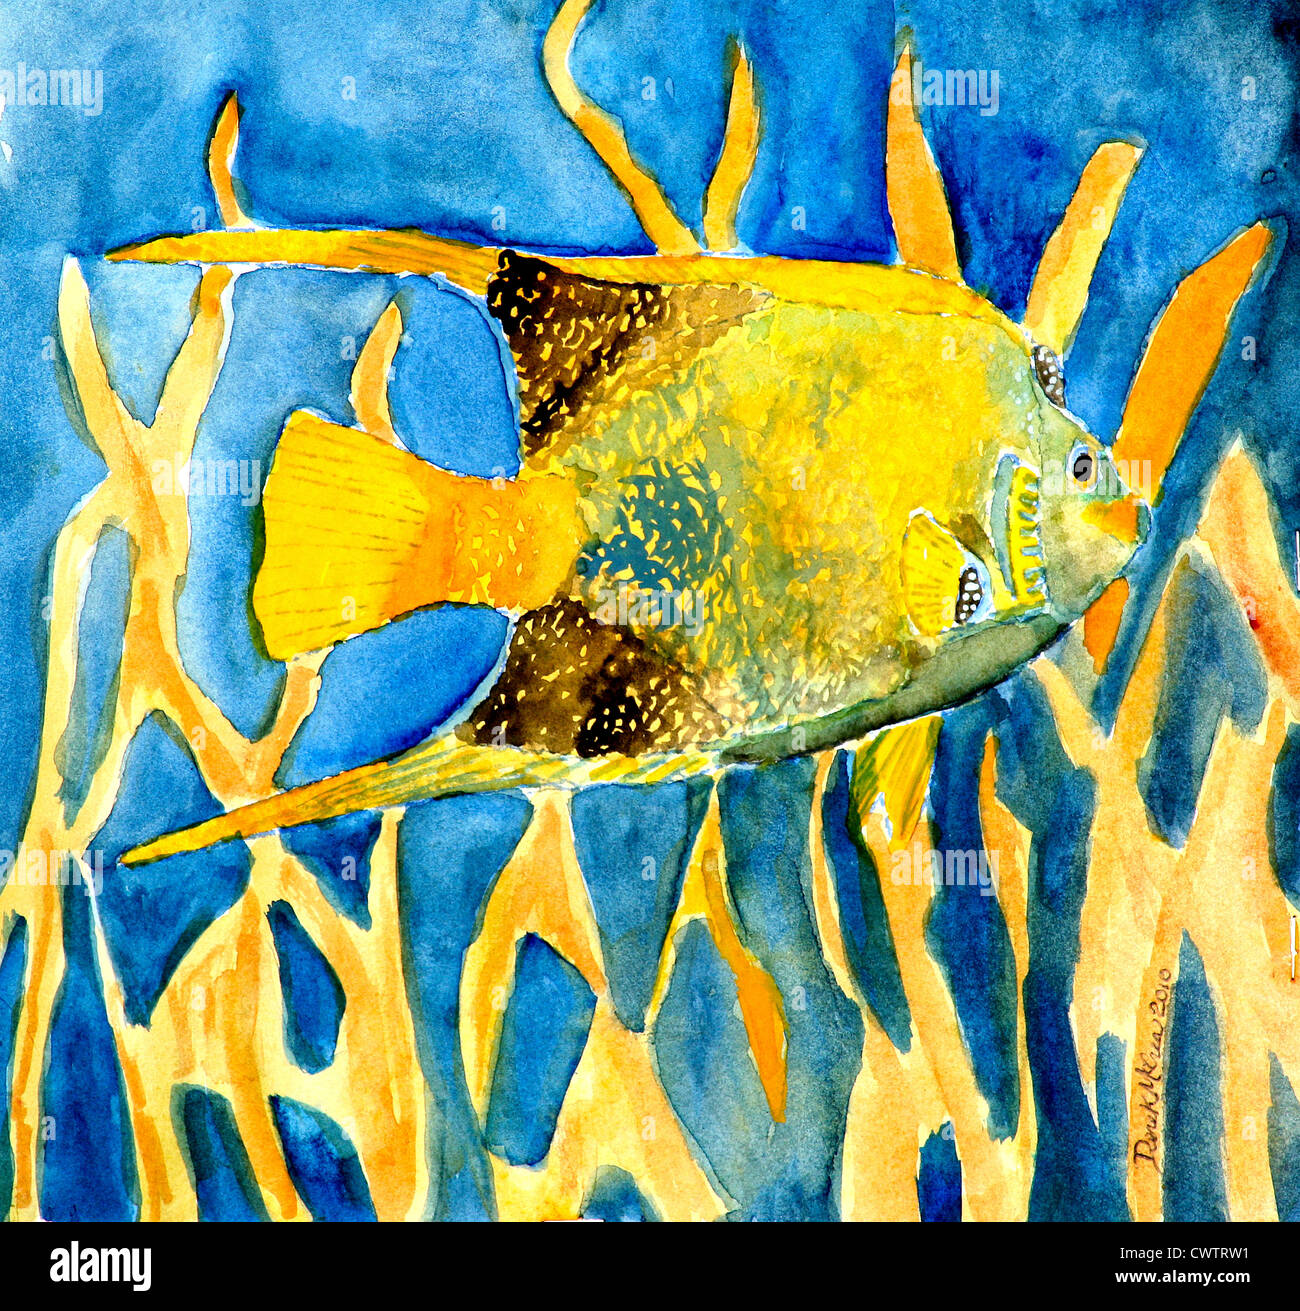 square fish watercolor painting yellow and blue saltwater salt water Stock Photo